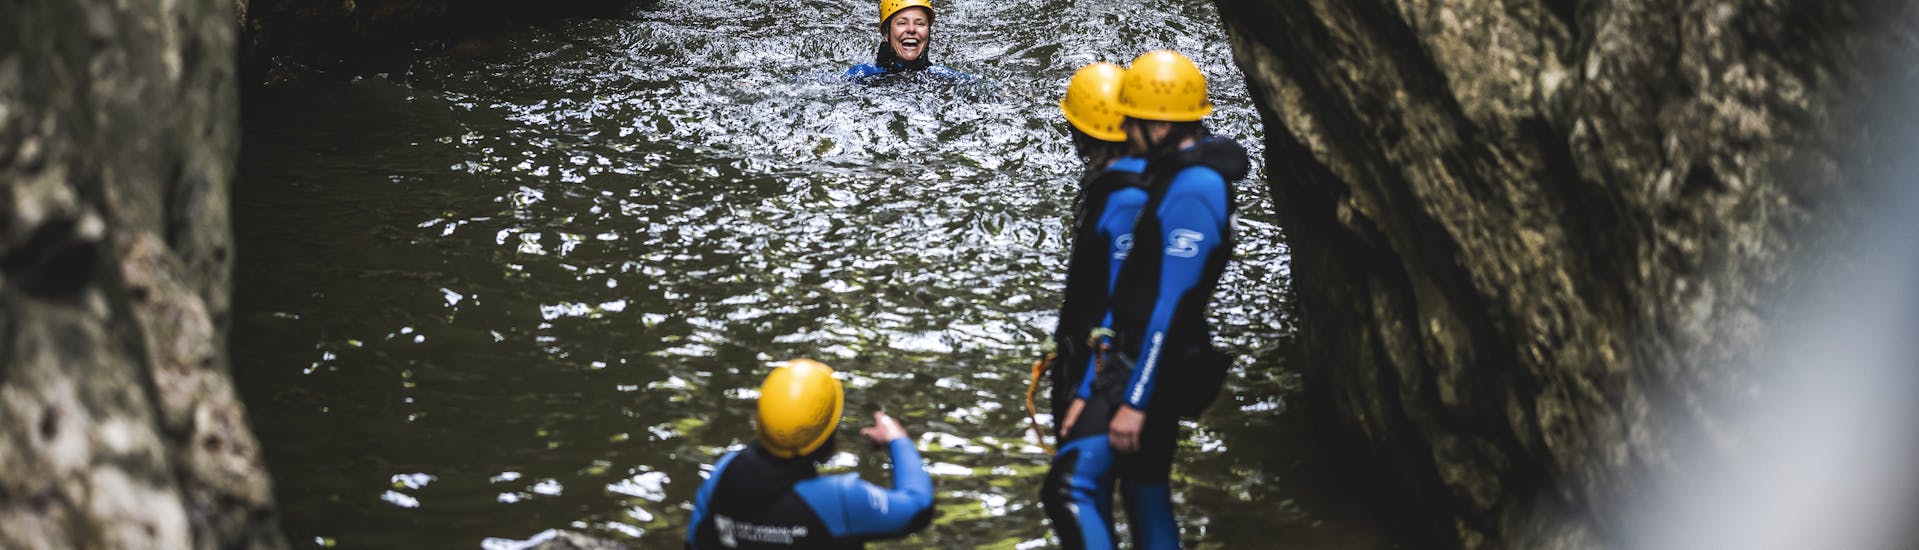 Canyoning Schwarzwasserbach - Level 3 for athletic people.